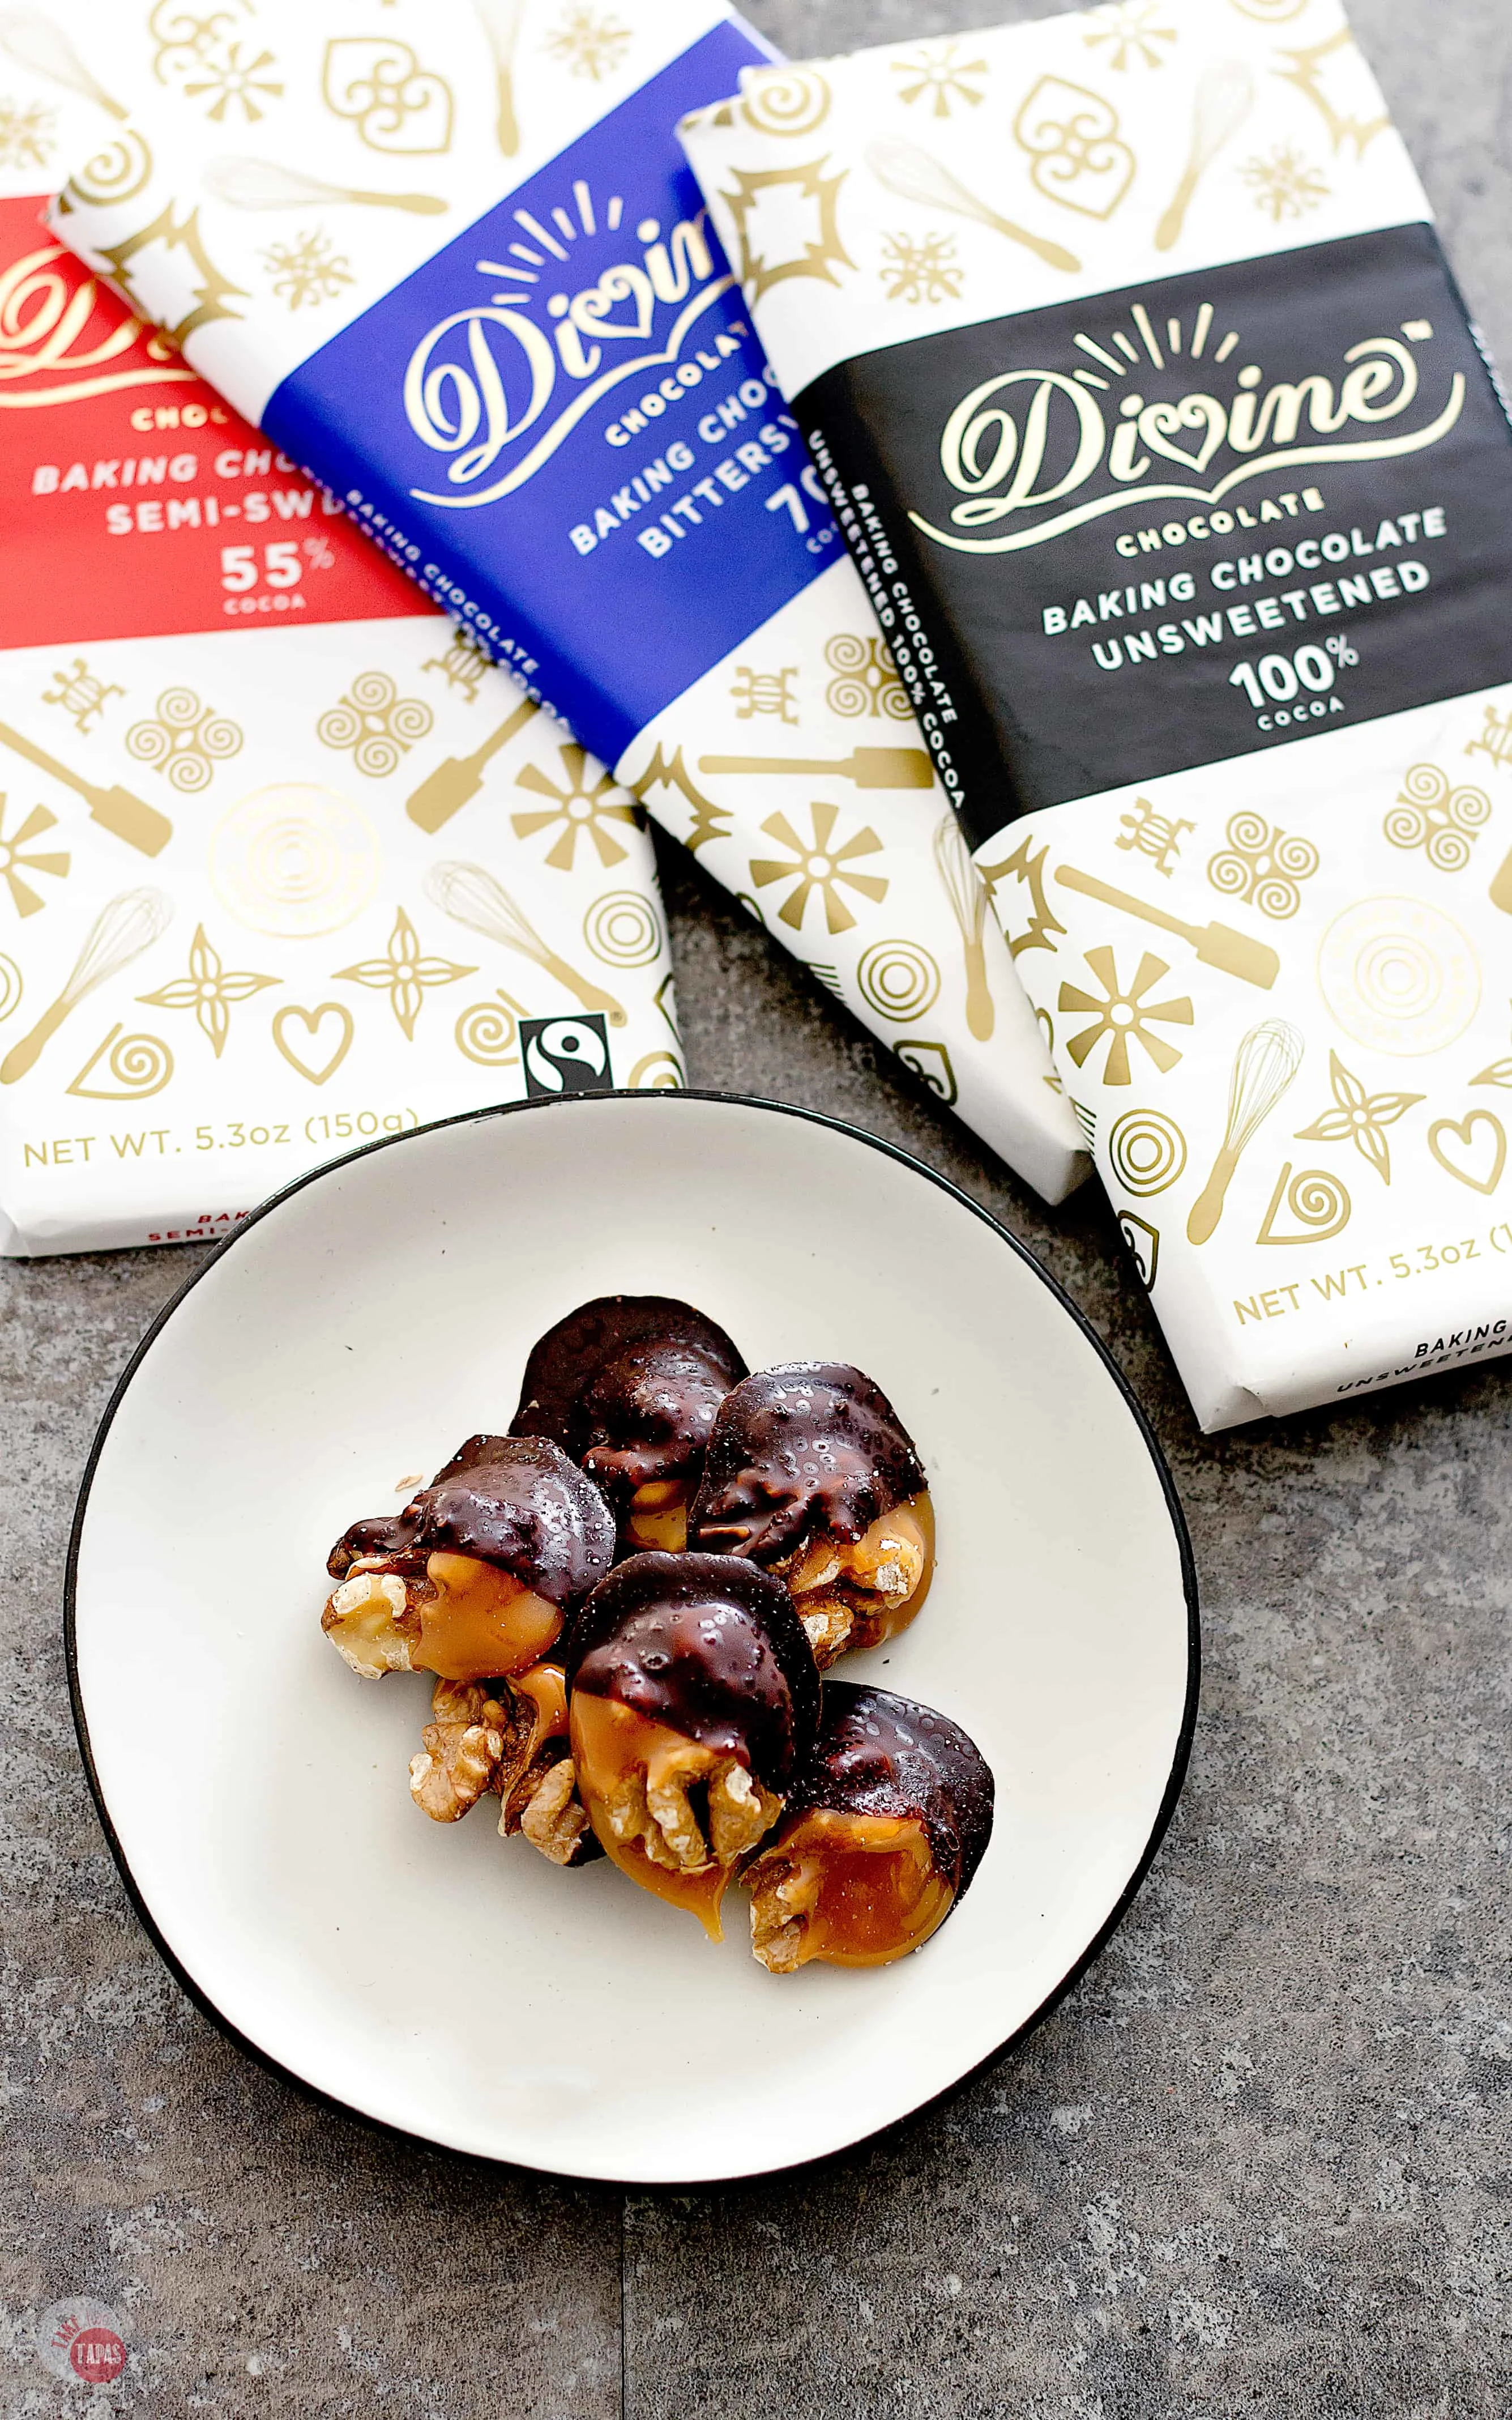 Walnut Amaretto Truffles are dipped in caramel and dark or bittersweet chocolate